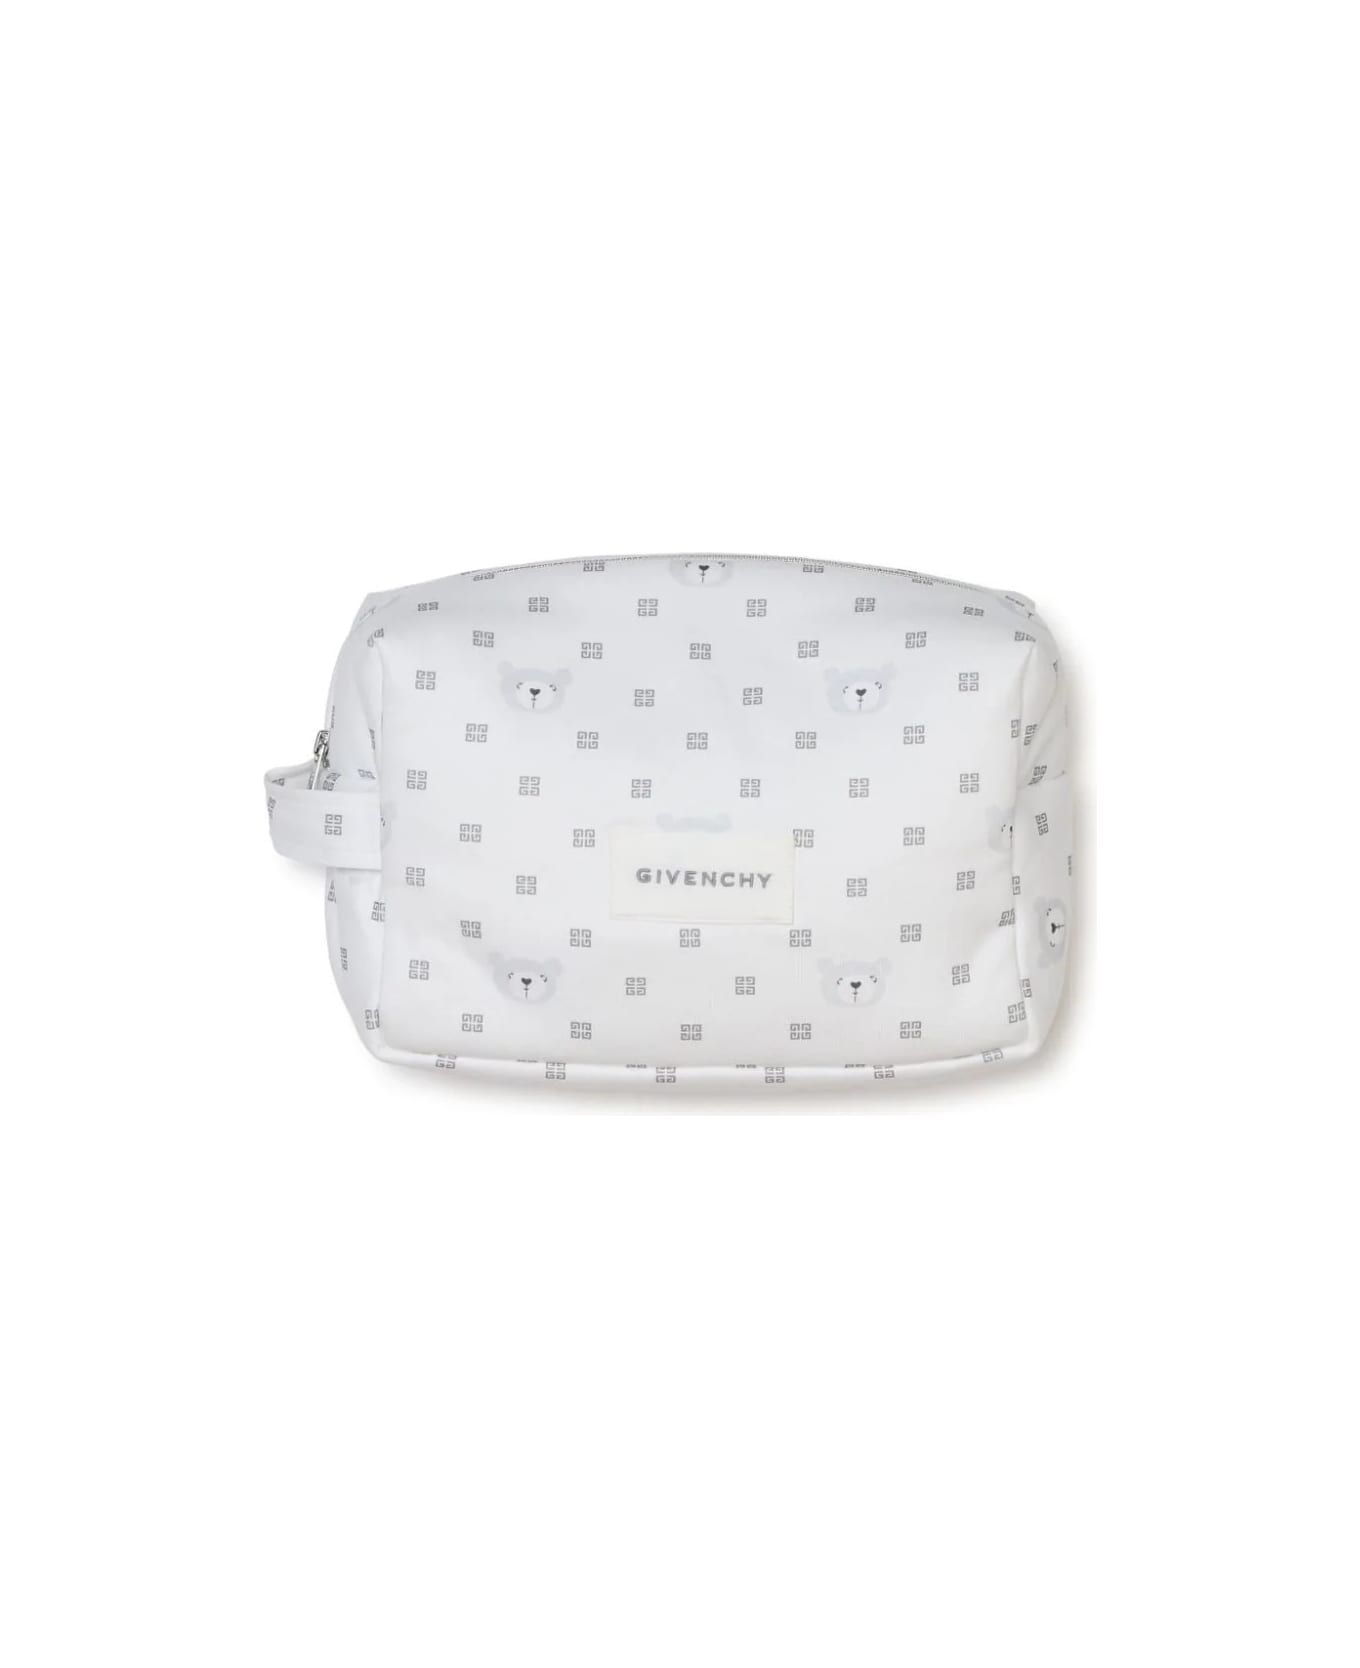 Givenchy Gift Set With Pyjamas, Bib And Trousse In 4g Cotton - White